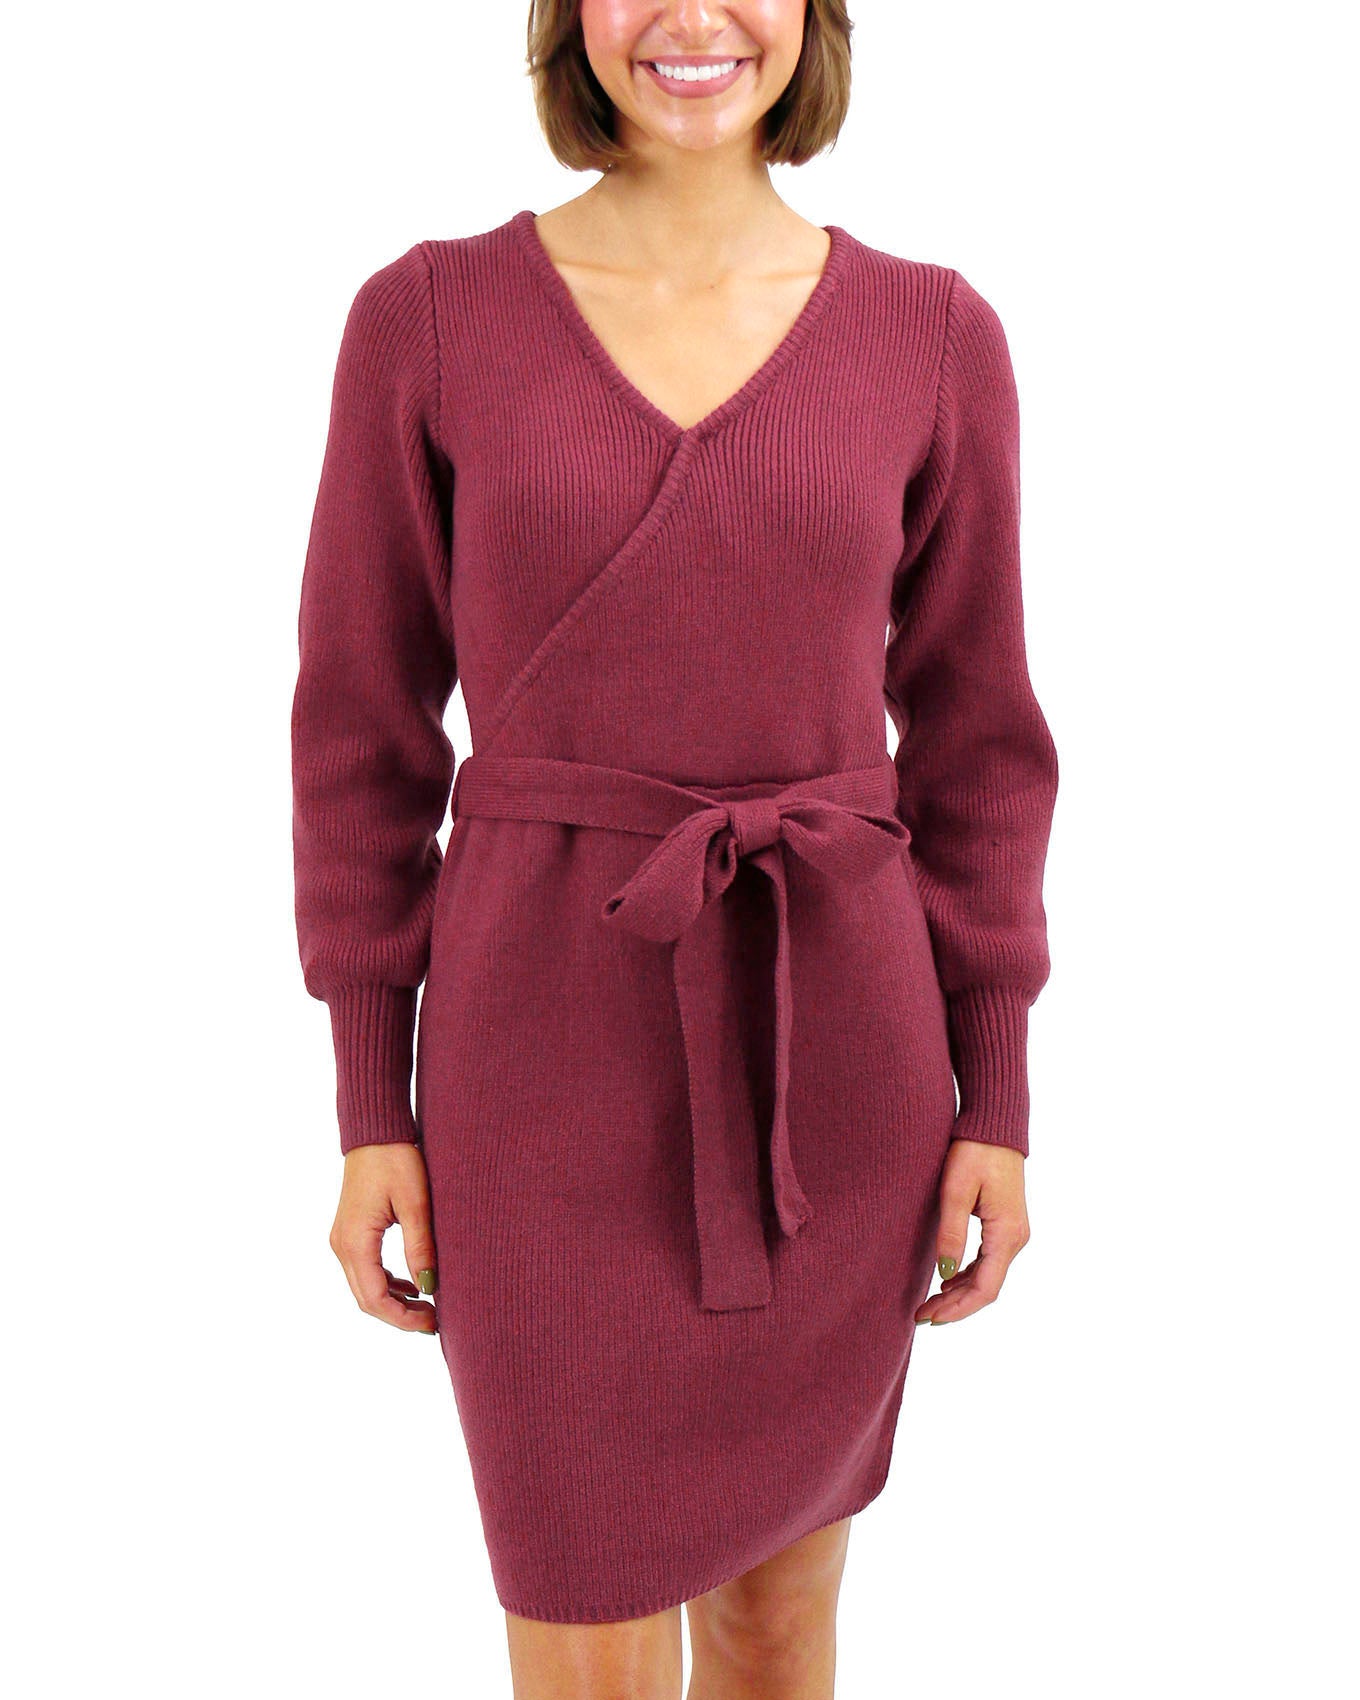 Front view stock shot of Cabernet Faux Wrap Sweater Dress